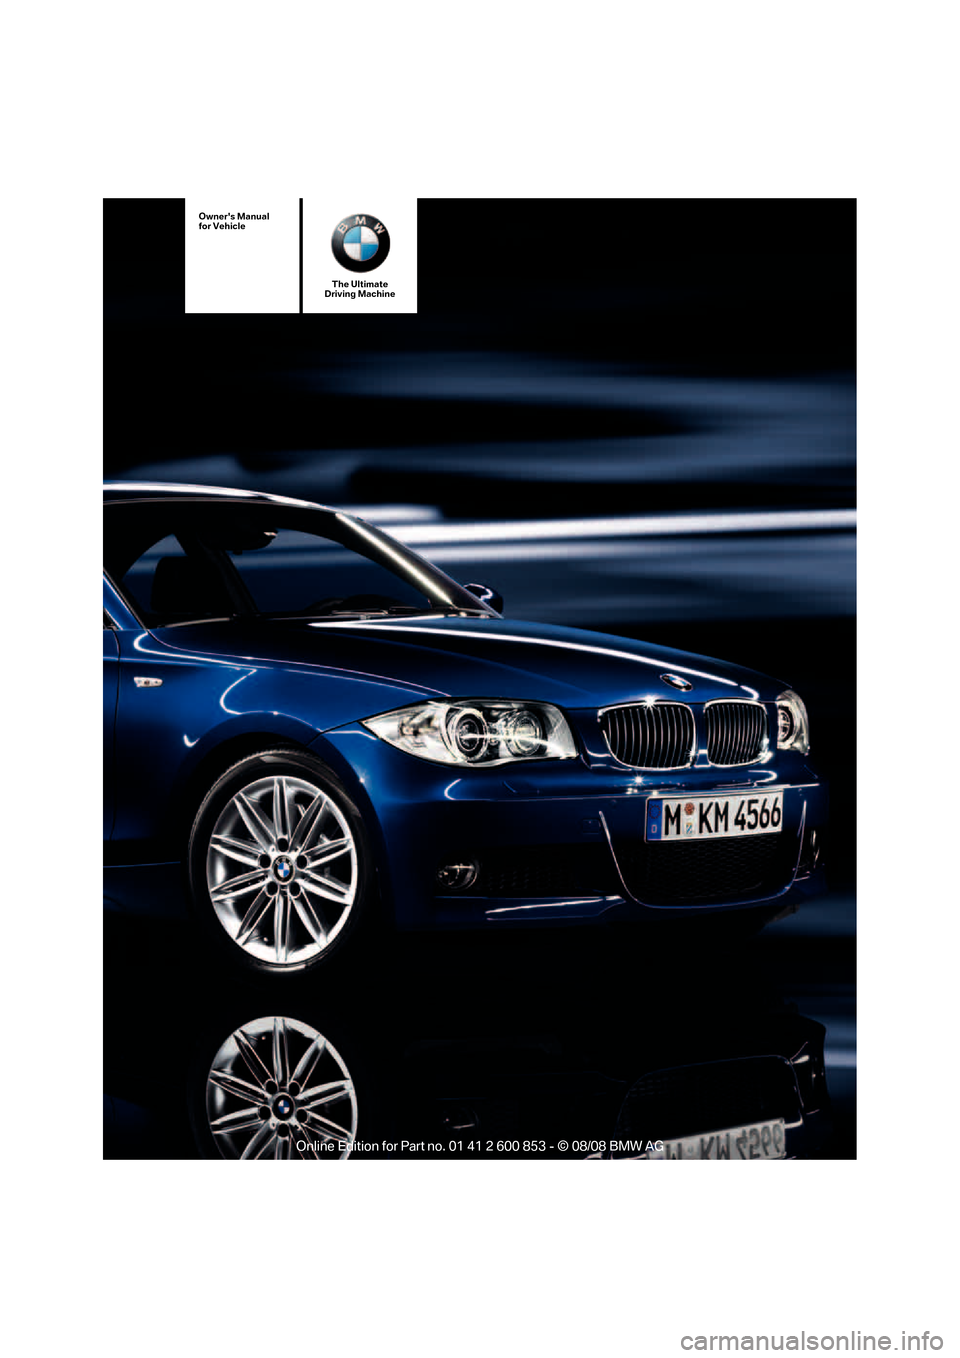 BMW 128I 2009 E88 Owners Manual The Ultimate
Driving Machine
Owners Manual
for Vehicle 